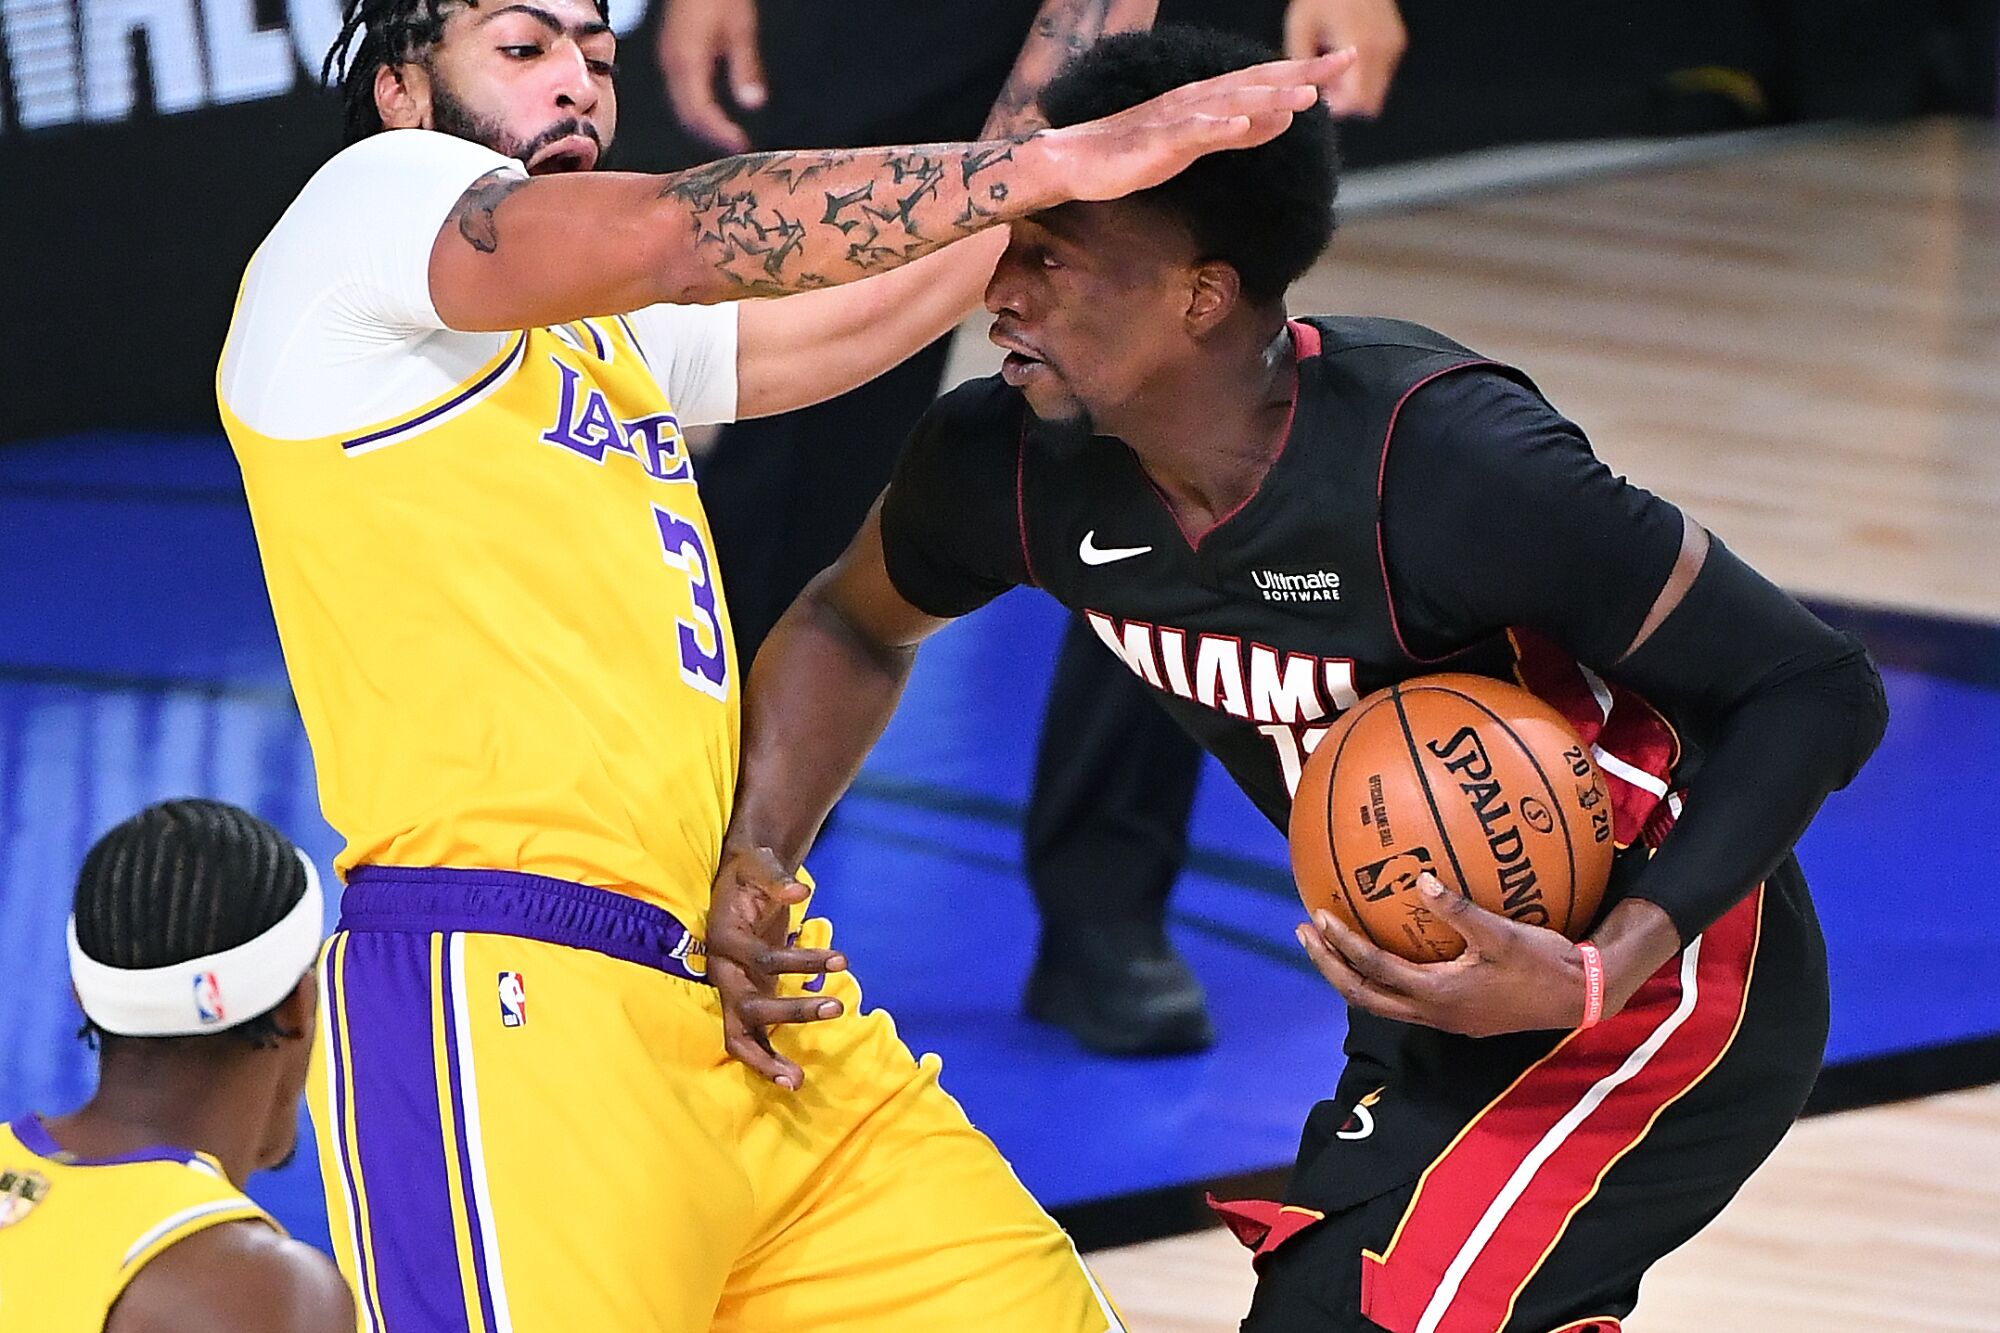 Lakers forward Anthony Davis takes a charge from Heat center Bam Adebayo during Game 4.